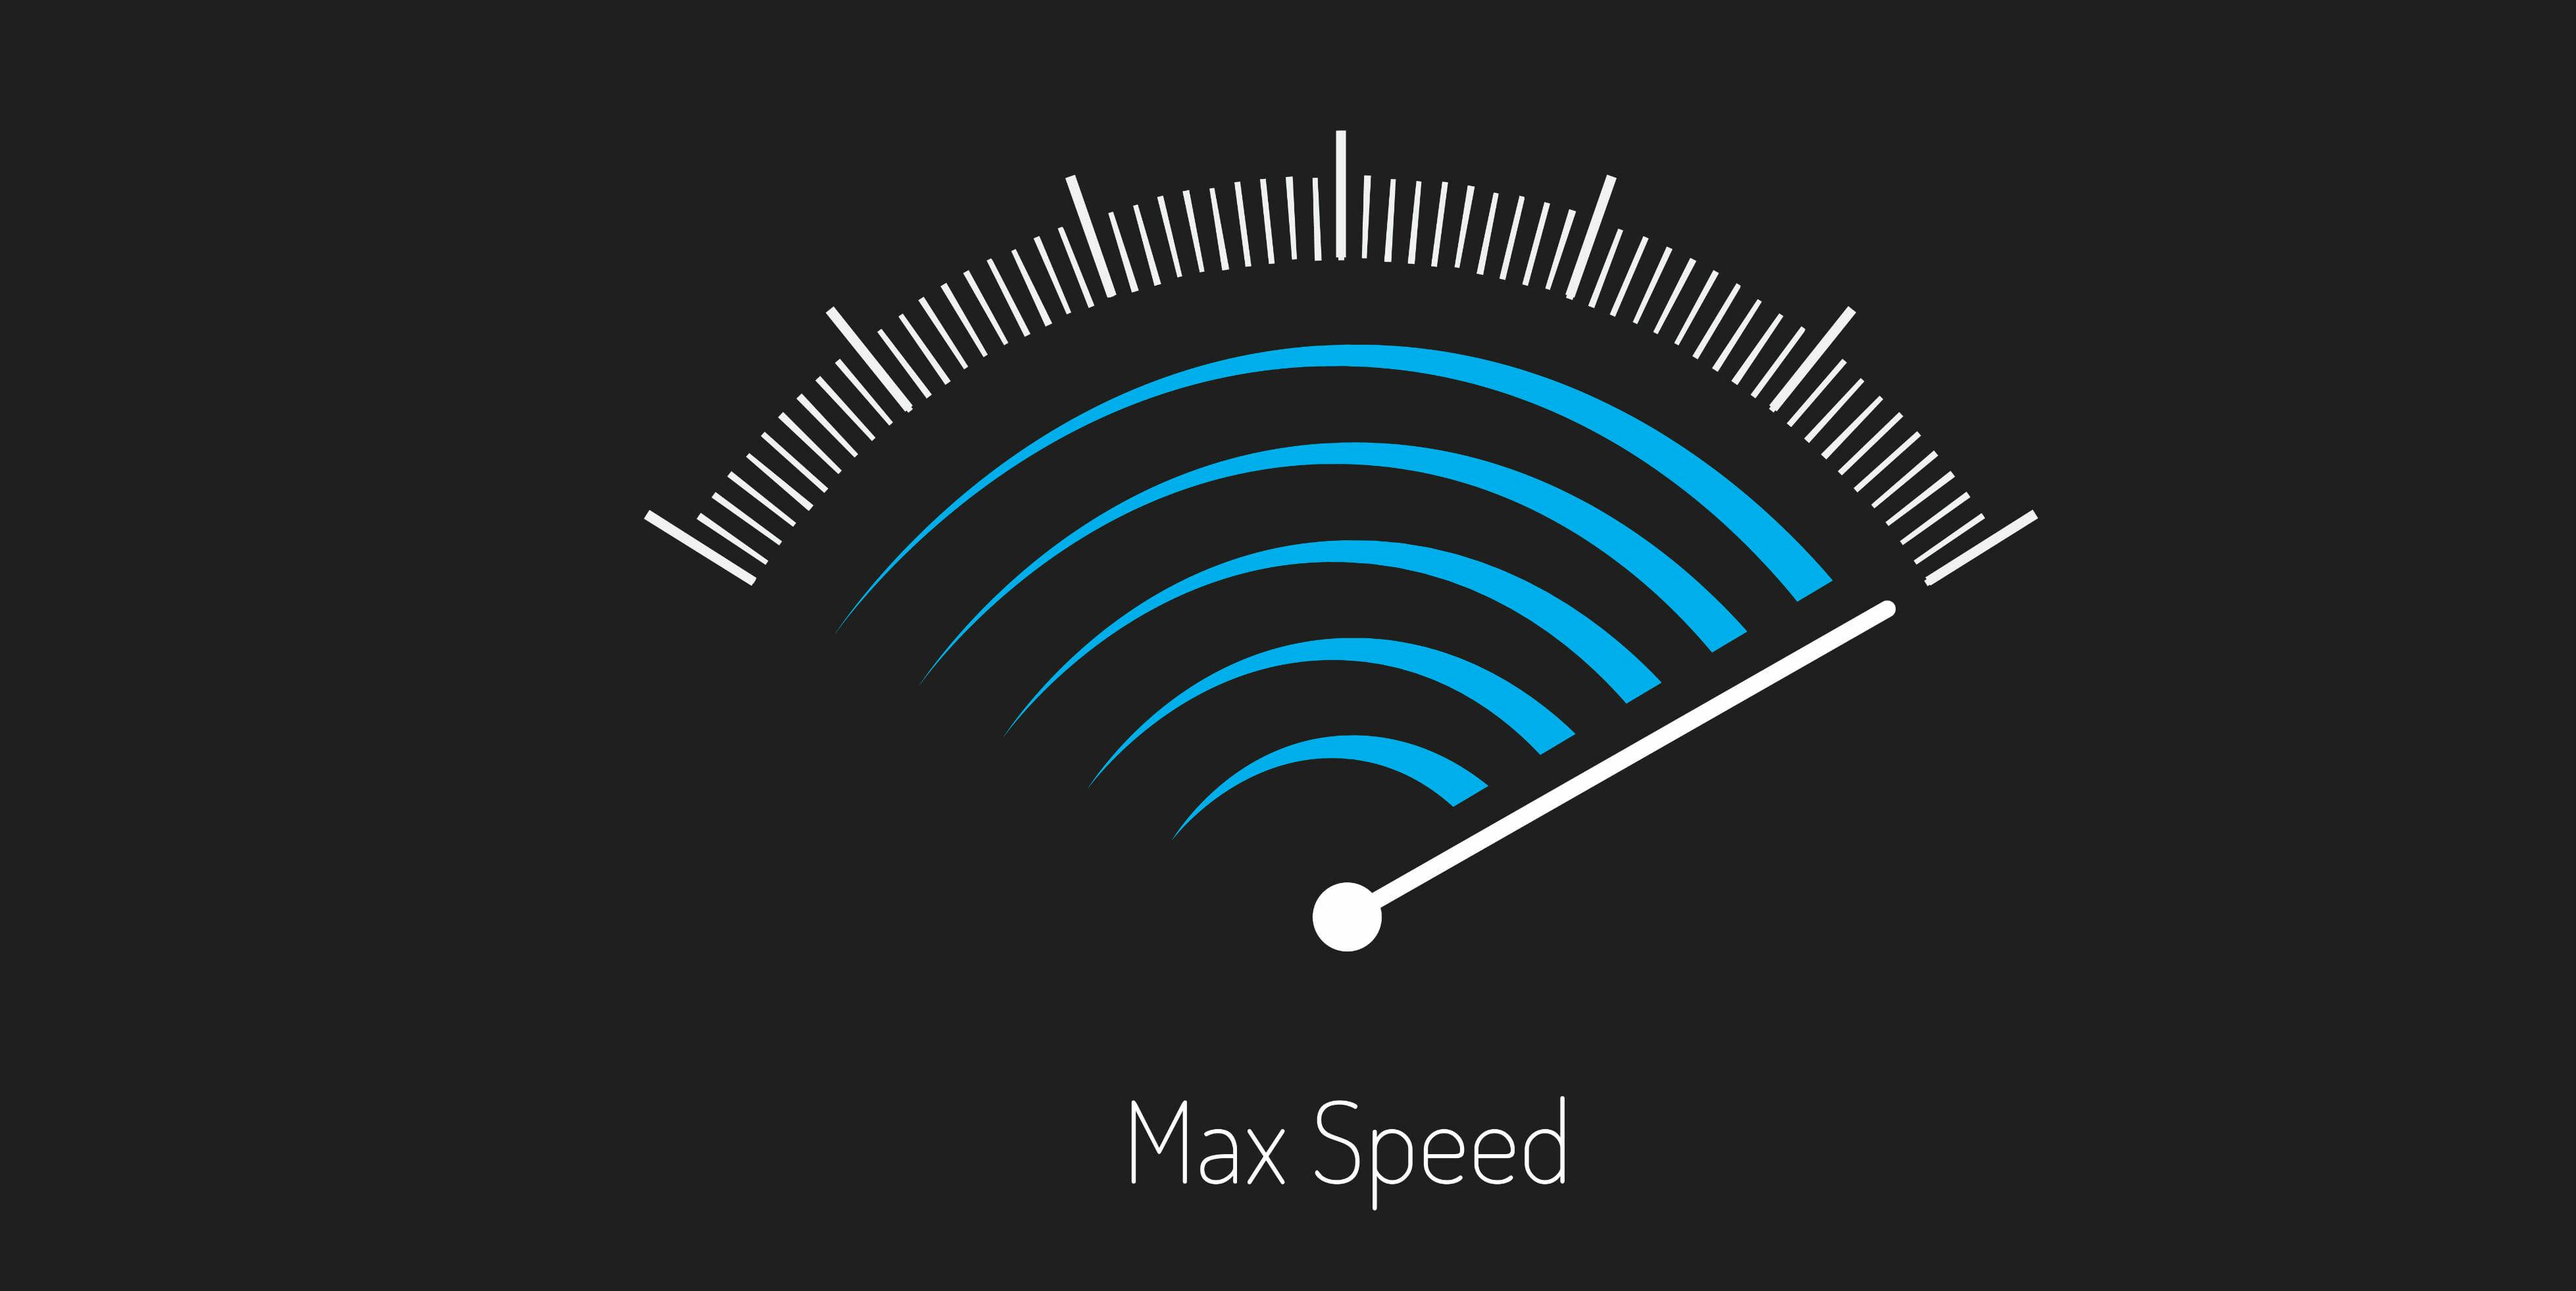 marionet uddøde beskytte What Is a Good Internet Speed? Here's What You Need